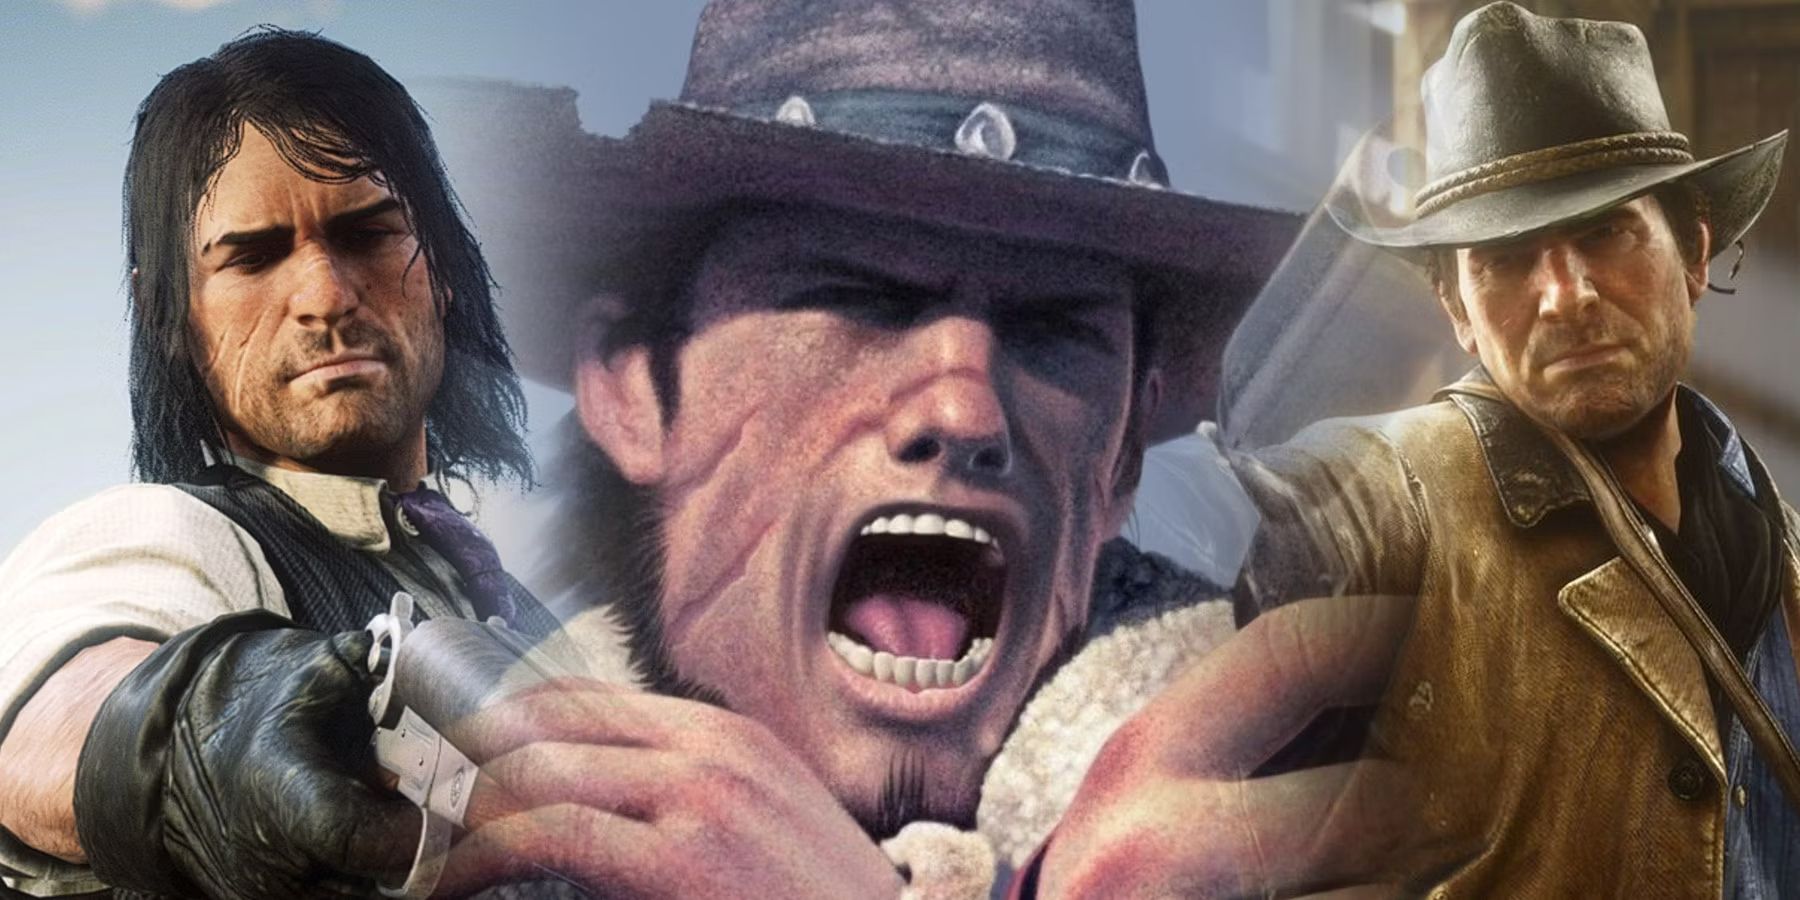 The Red Dead series' three protagonist, from left to right - John Marston, Red Harlow, and Arthur Morgan.